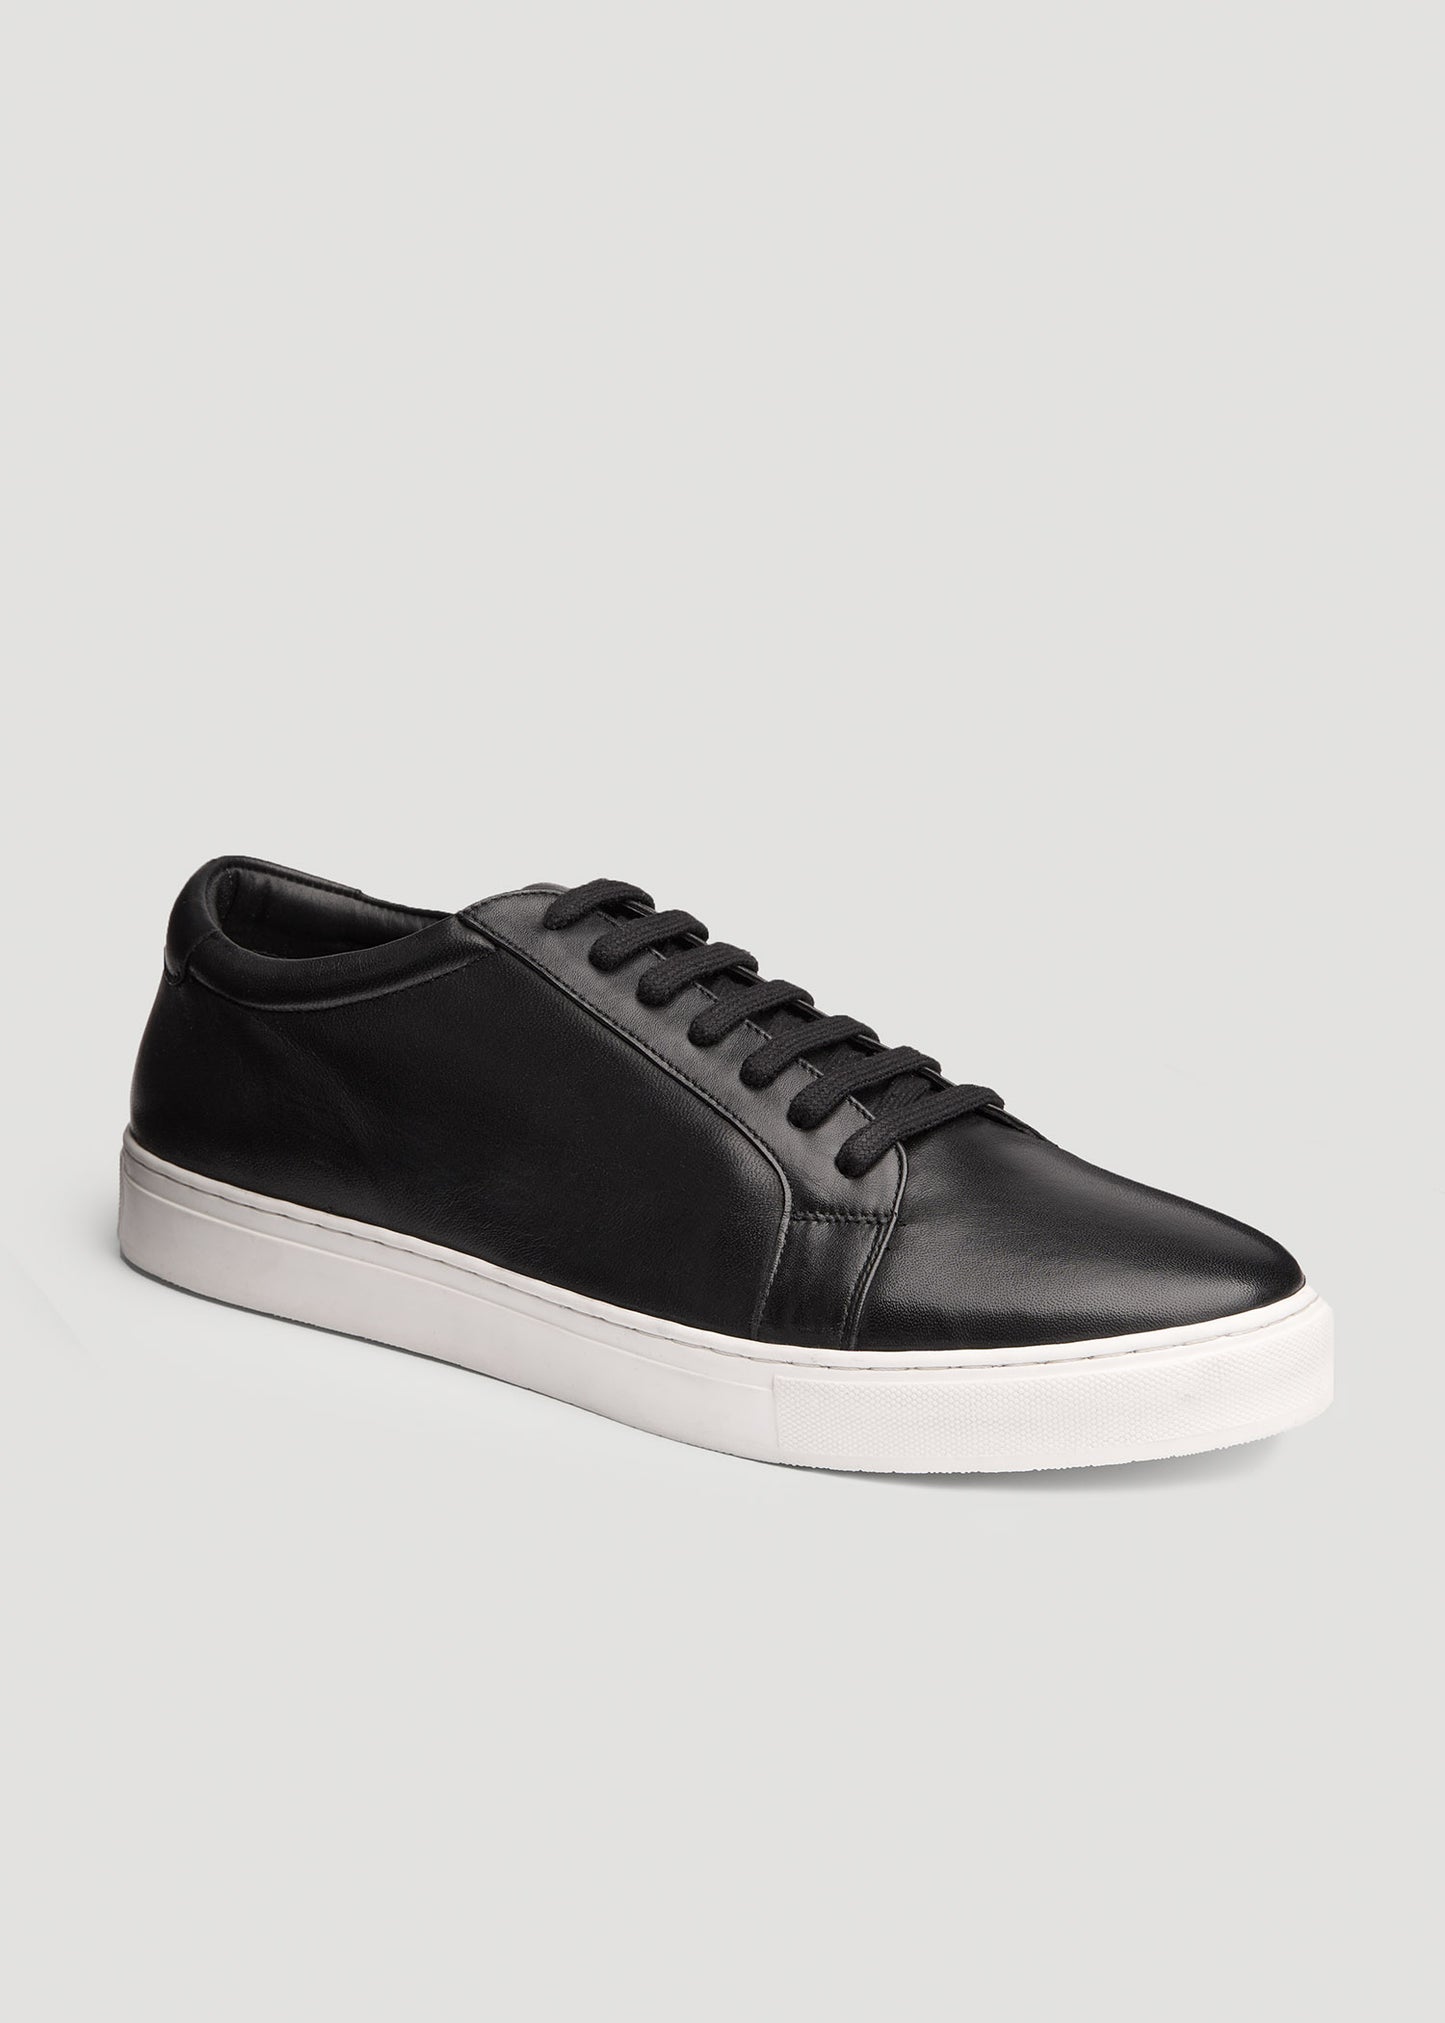 Side view of American Tall's Cupsole Tennis Sneakers for Tall Men in Black.